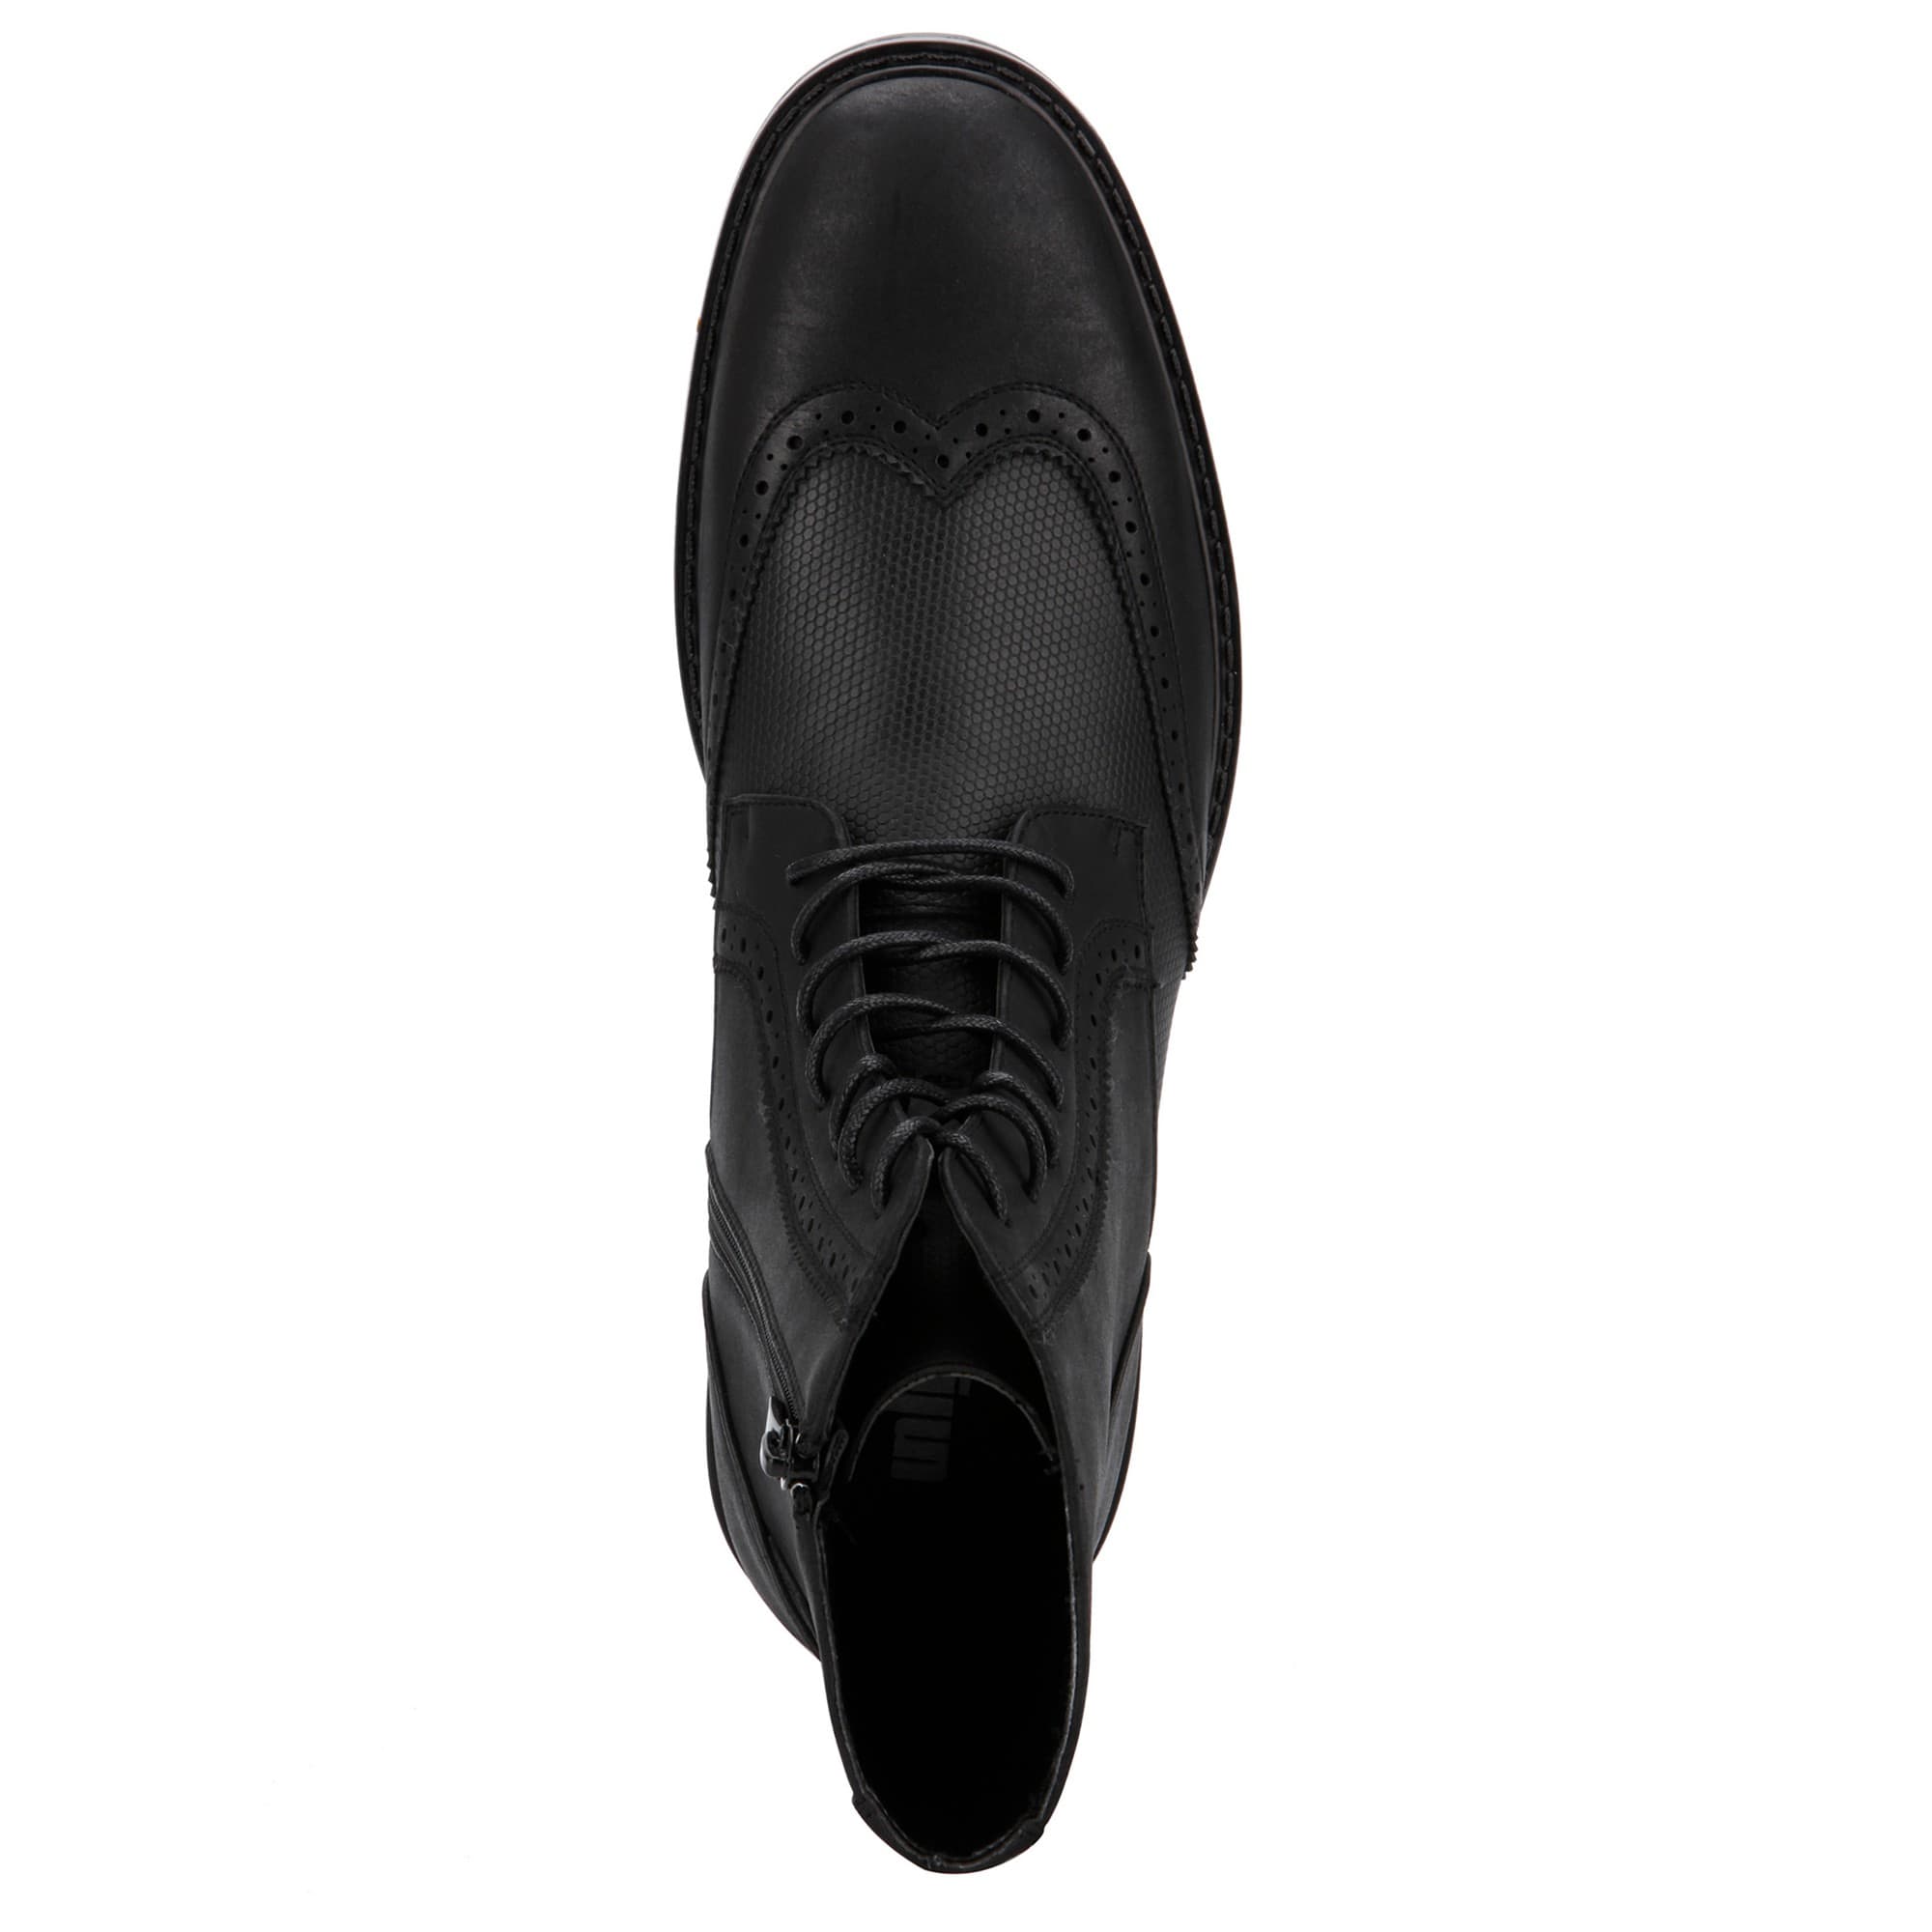 woocommerce-673321-2209615.cloudwaysapps.com-unlisted-by-kenneth-cole-mens-black-buzzer-boots